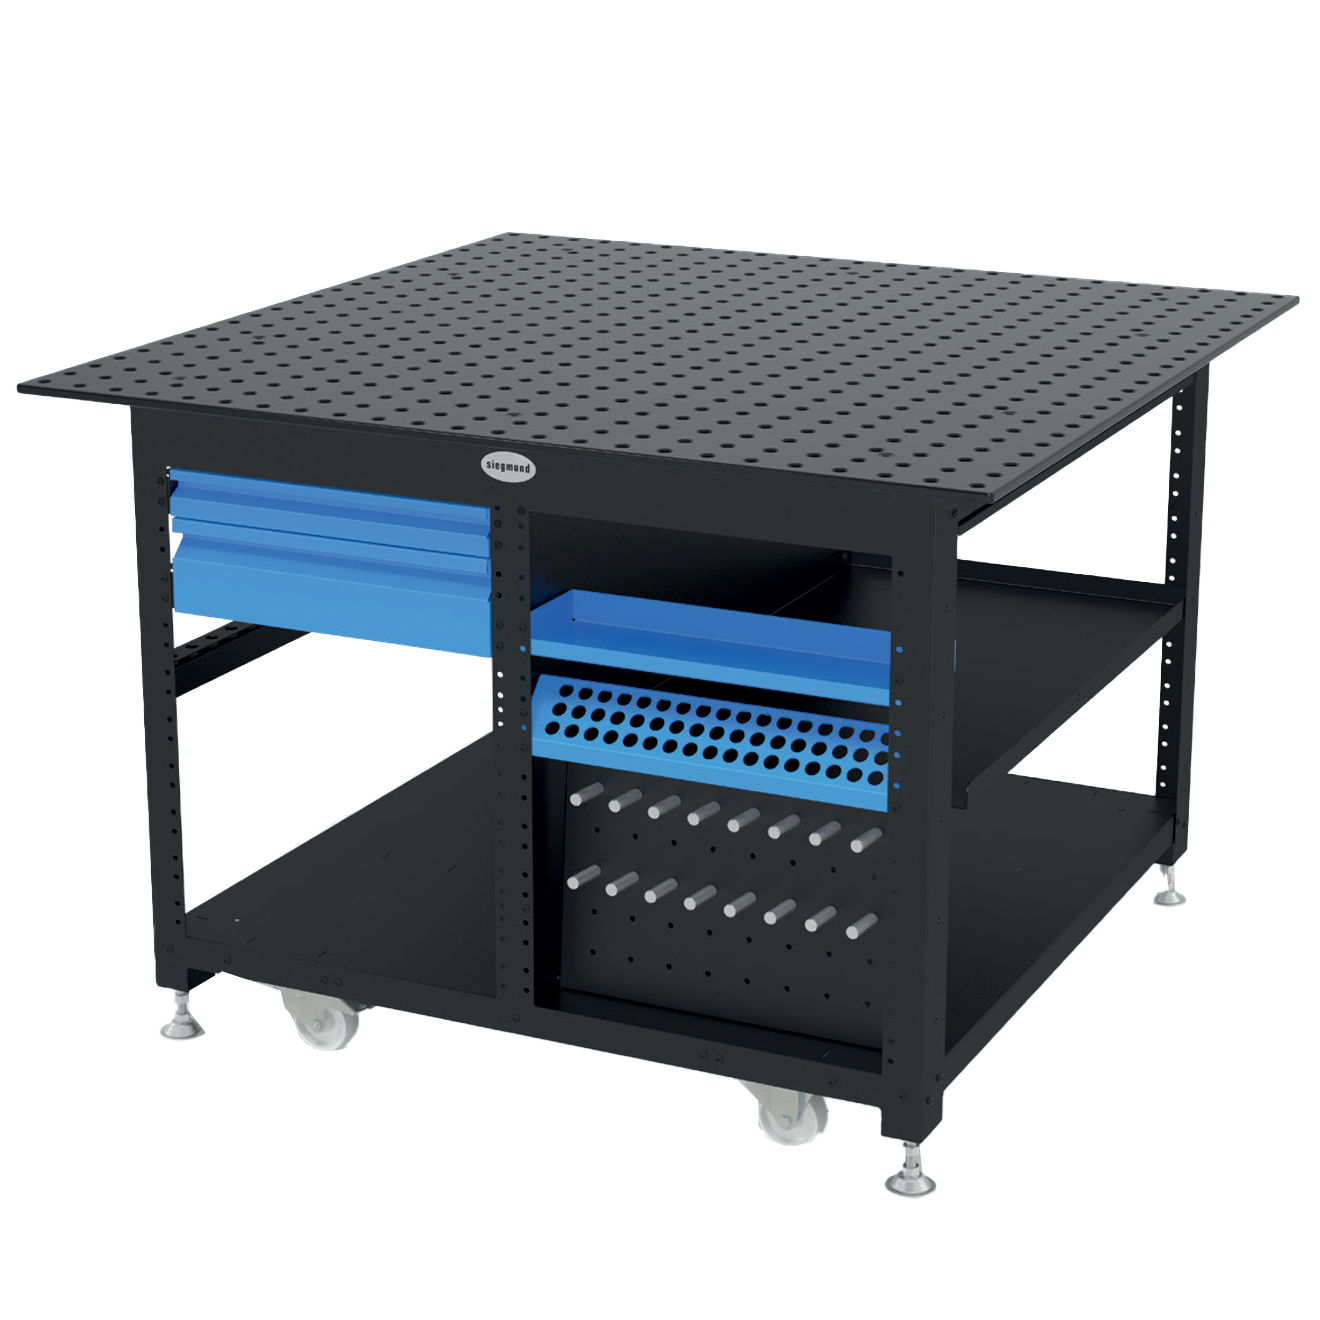 US167643: System 16 Workstation with "Set B" Including 4'x4' (48"x48") Perforated Plate (Siegmund Imperial Series)